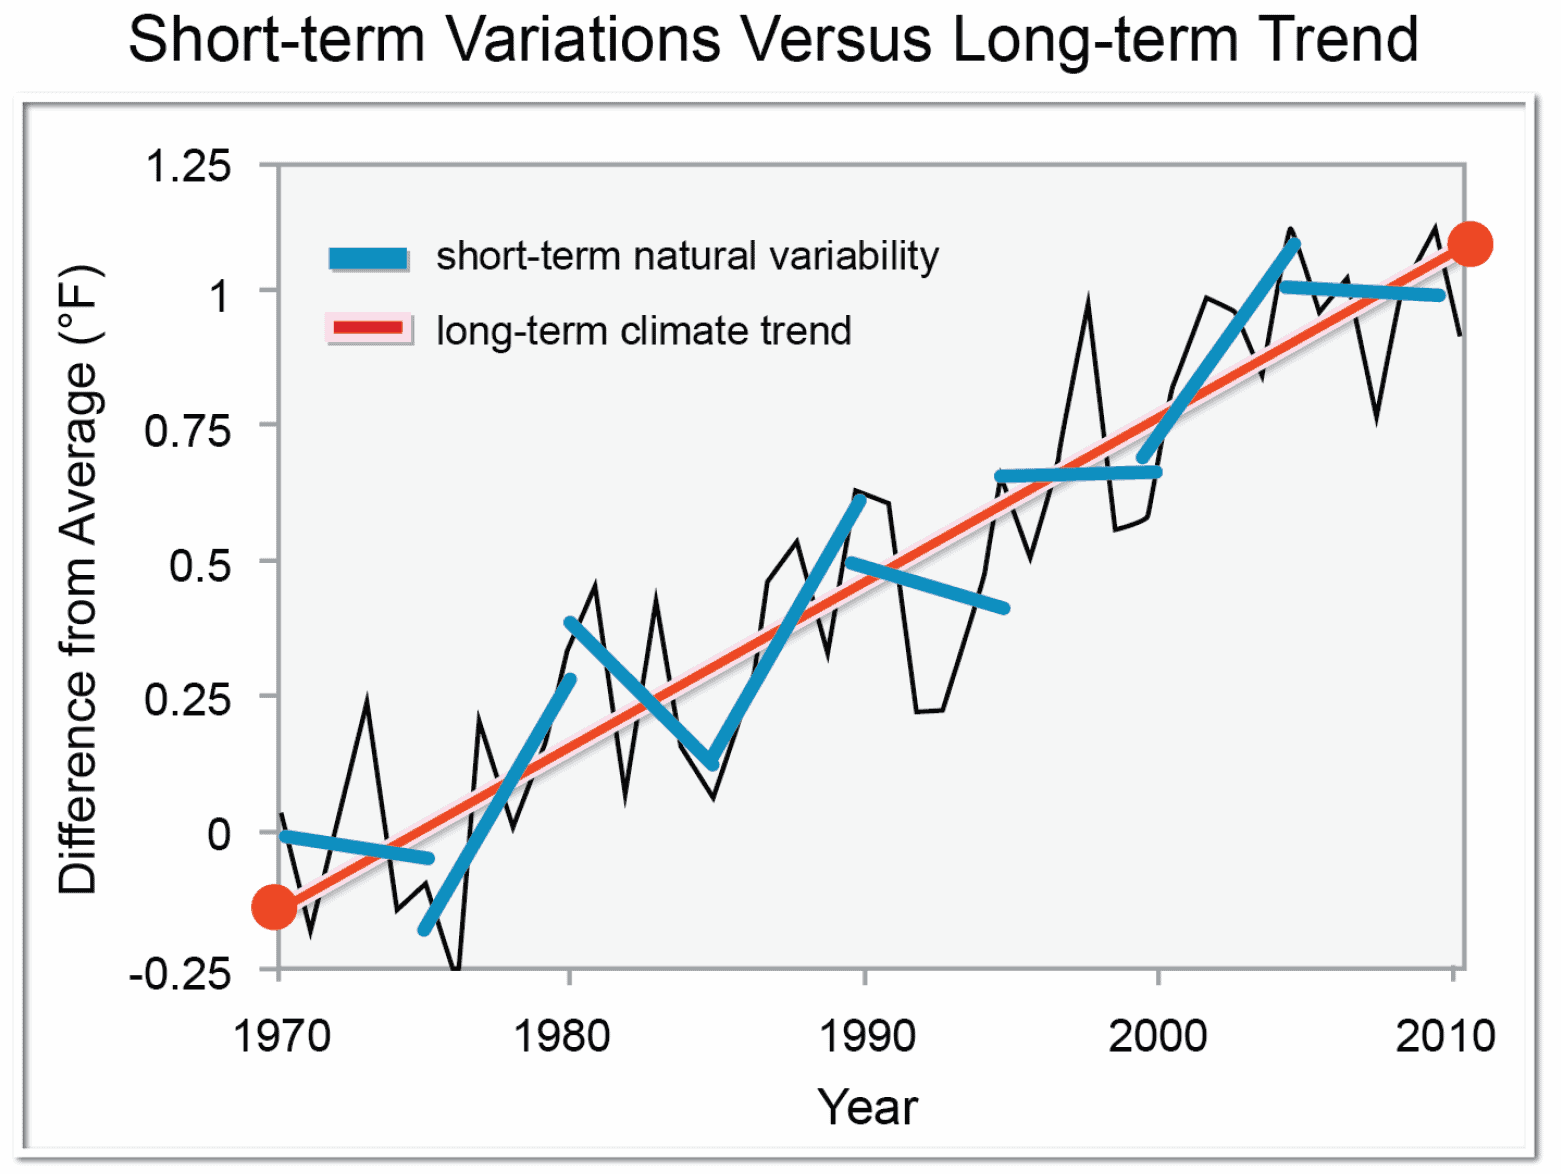 This graph shows how short-term variations occur in the global temperature record. However, the graph still shows a long-term trend of global warming.
Climate change is defined as a change in the average conditions over periods of 30 years or more. On these time scales, global temperature continues to increase. This is shown on the graph as the red line. Over shorter time scales, however, natural variability (due to the effects of El Niño and La Niña events in the Pacific Ocean, for example, or volcanic eruptions or changes in energy from the Sun) can reduce the rate of warming or even create a temporary cooling.